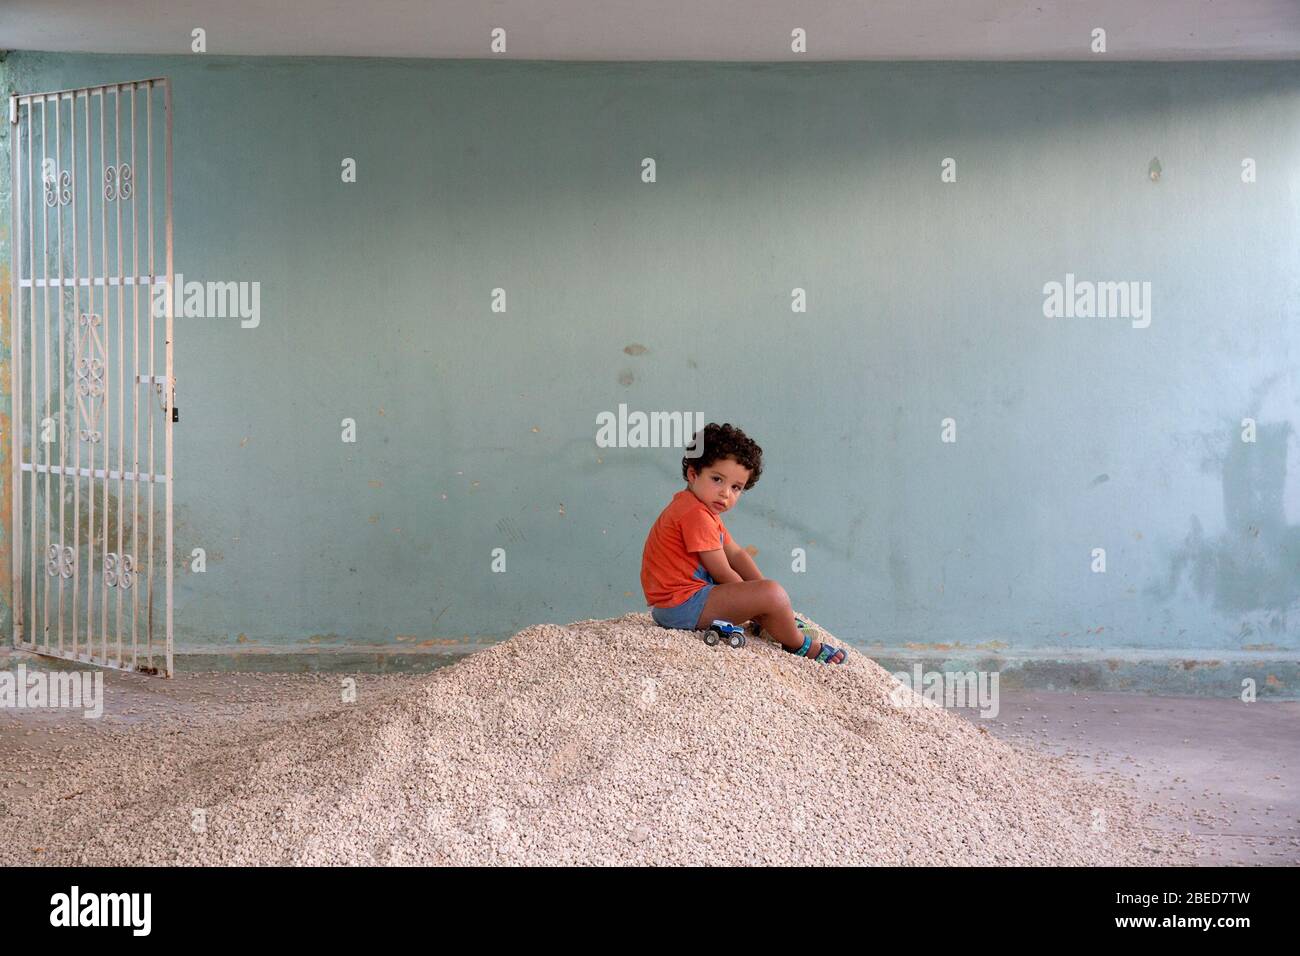 Thiago playing alone on a pile of gravel on his eighteenth day of self-isolation due to Covid-19 pandemic at a temporary home in Mérida, Yucatán, Mexico on April 1, 2020. Thiago, 3-years-old, is the son of the photographer. He was documented as part of a project titled “When I grow up” about a child growing up on quarantine, away from other children and from the outside world, during the coronavirus pandemic. (Photo by Bénédicte Desrus/Sipa USA) Credit: Sipa USA/Alamy Live News Stock Photo